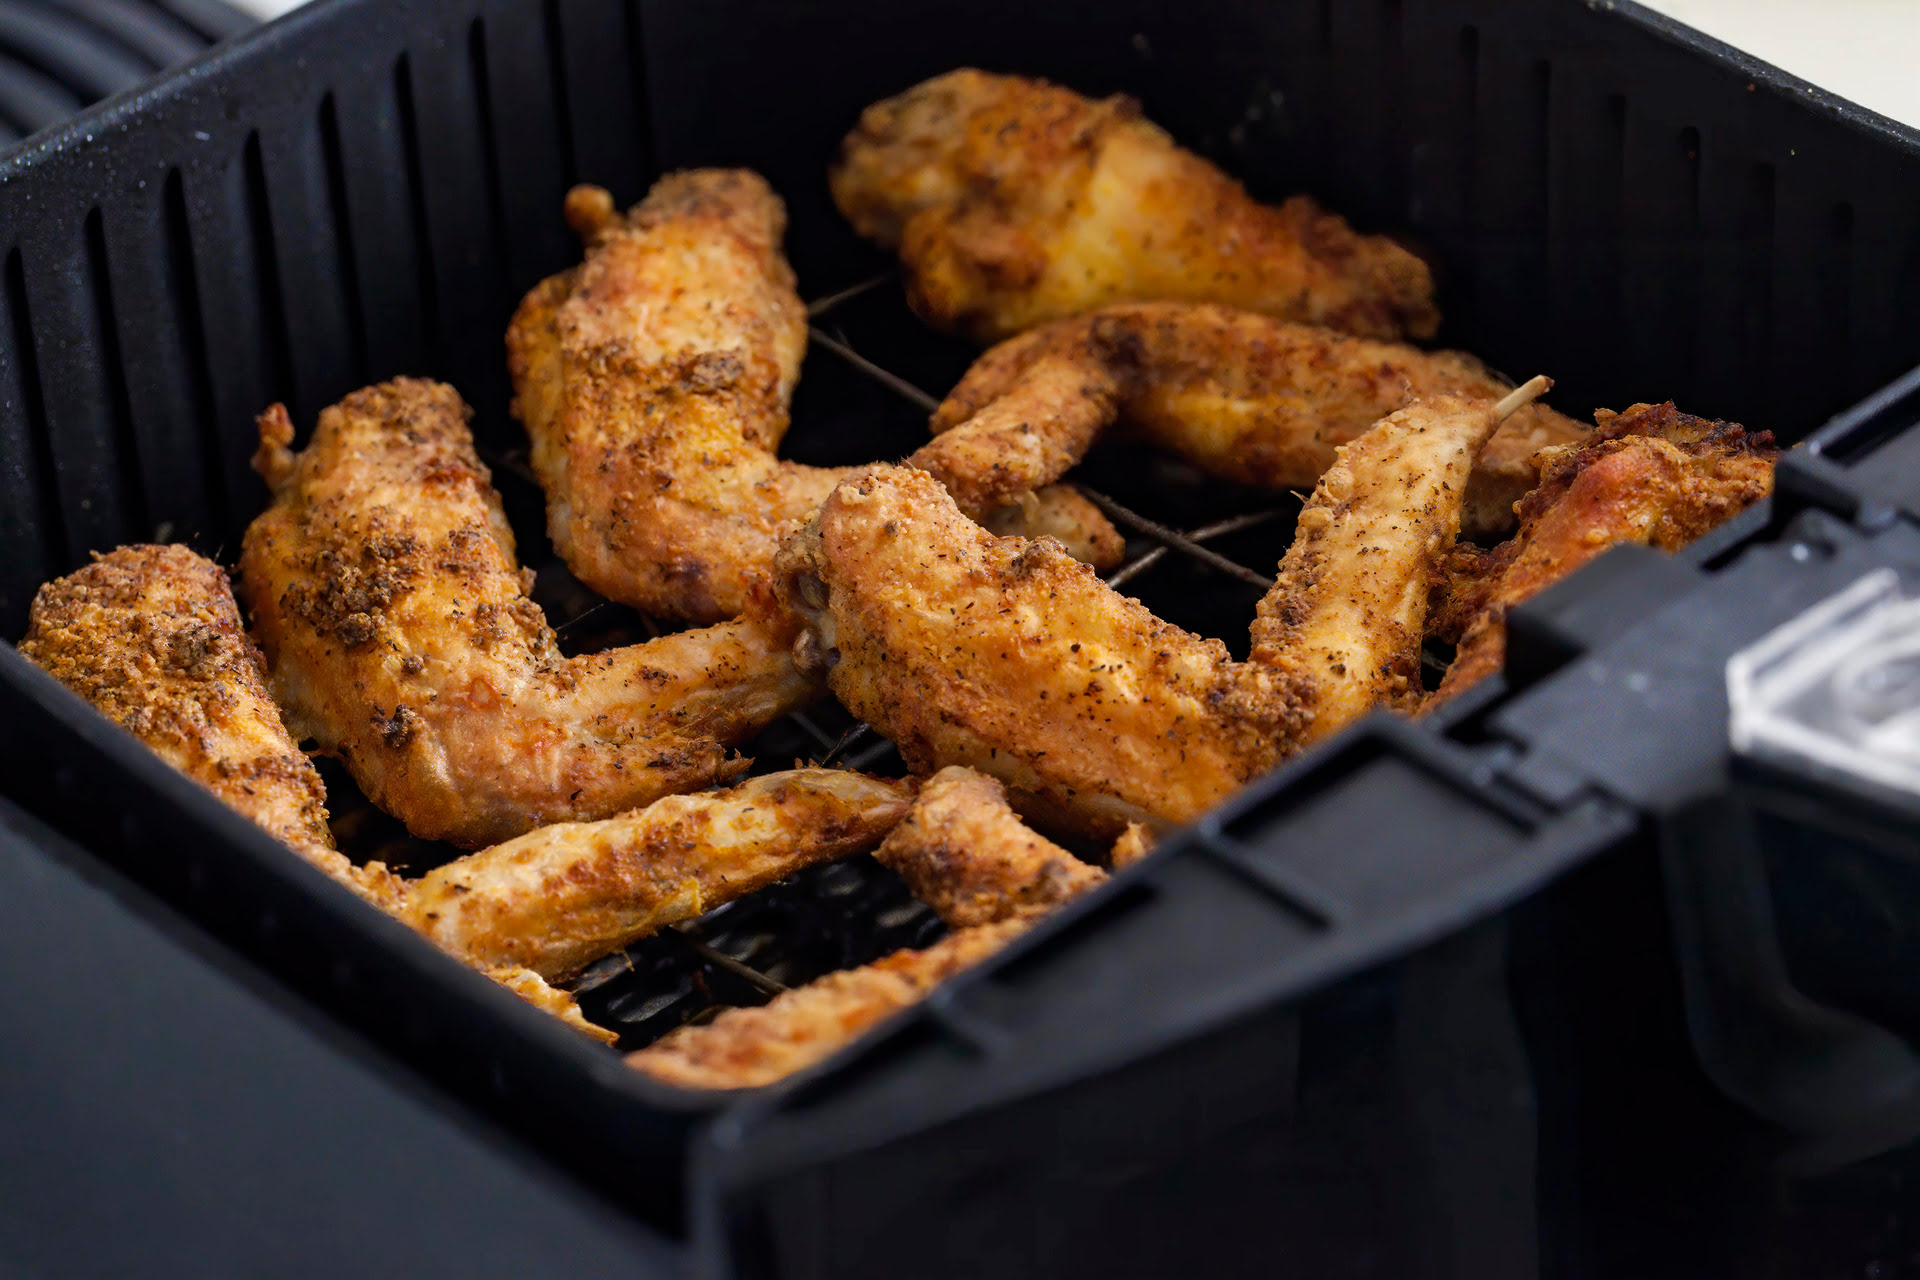 How To Reheat Fried Chicken In An Air Fryer